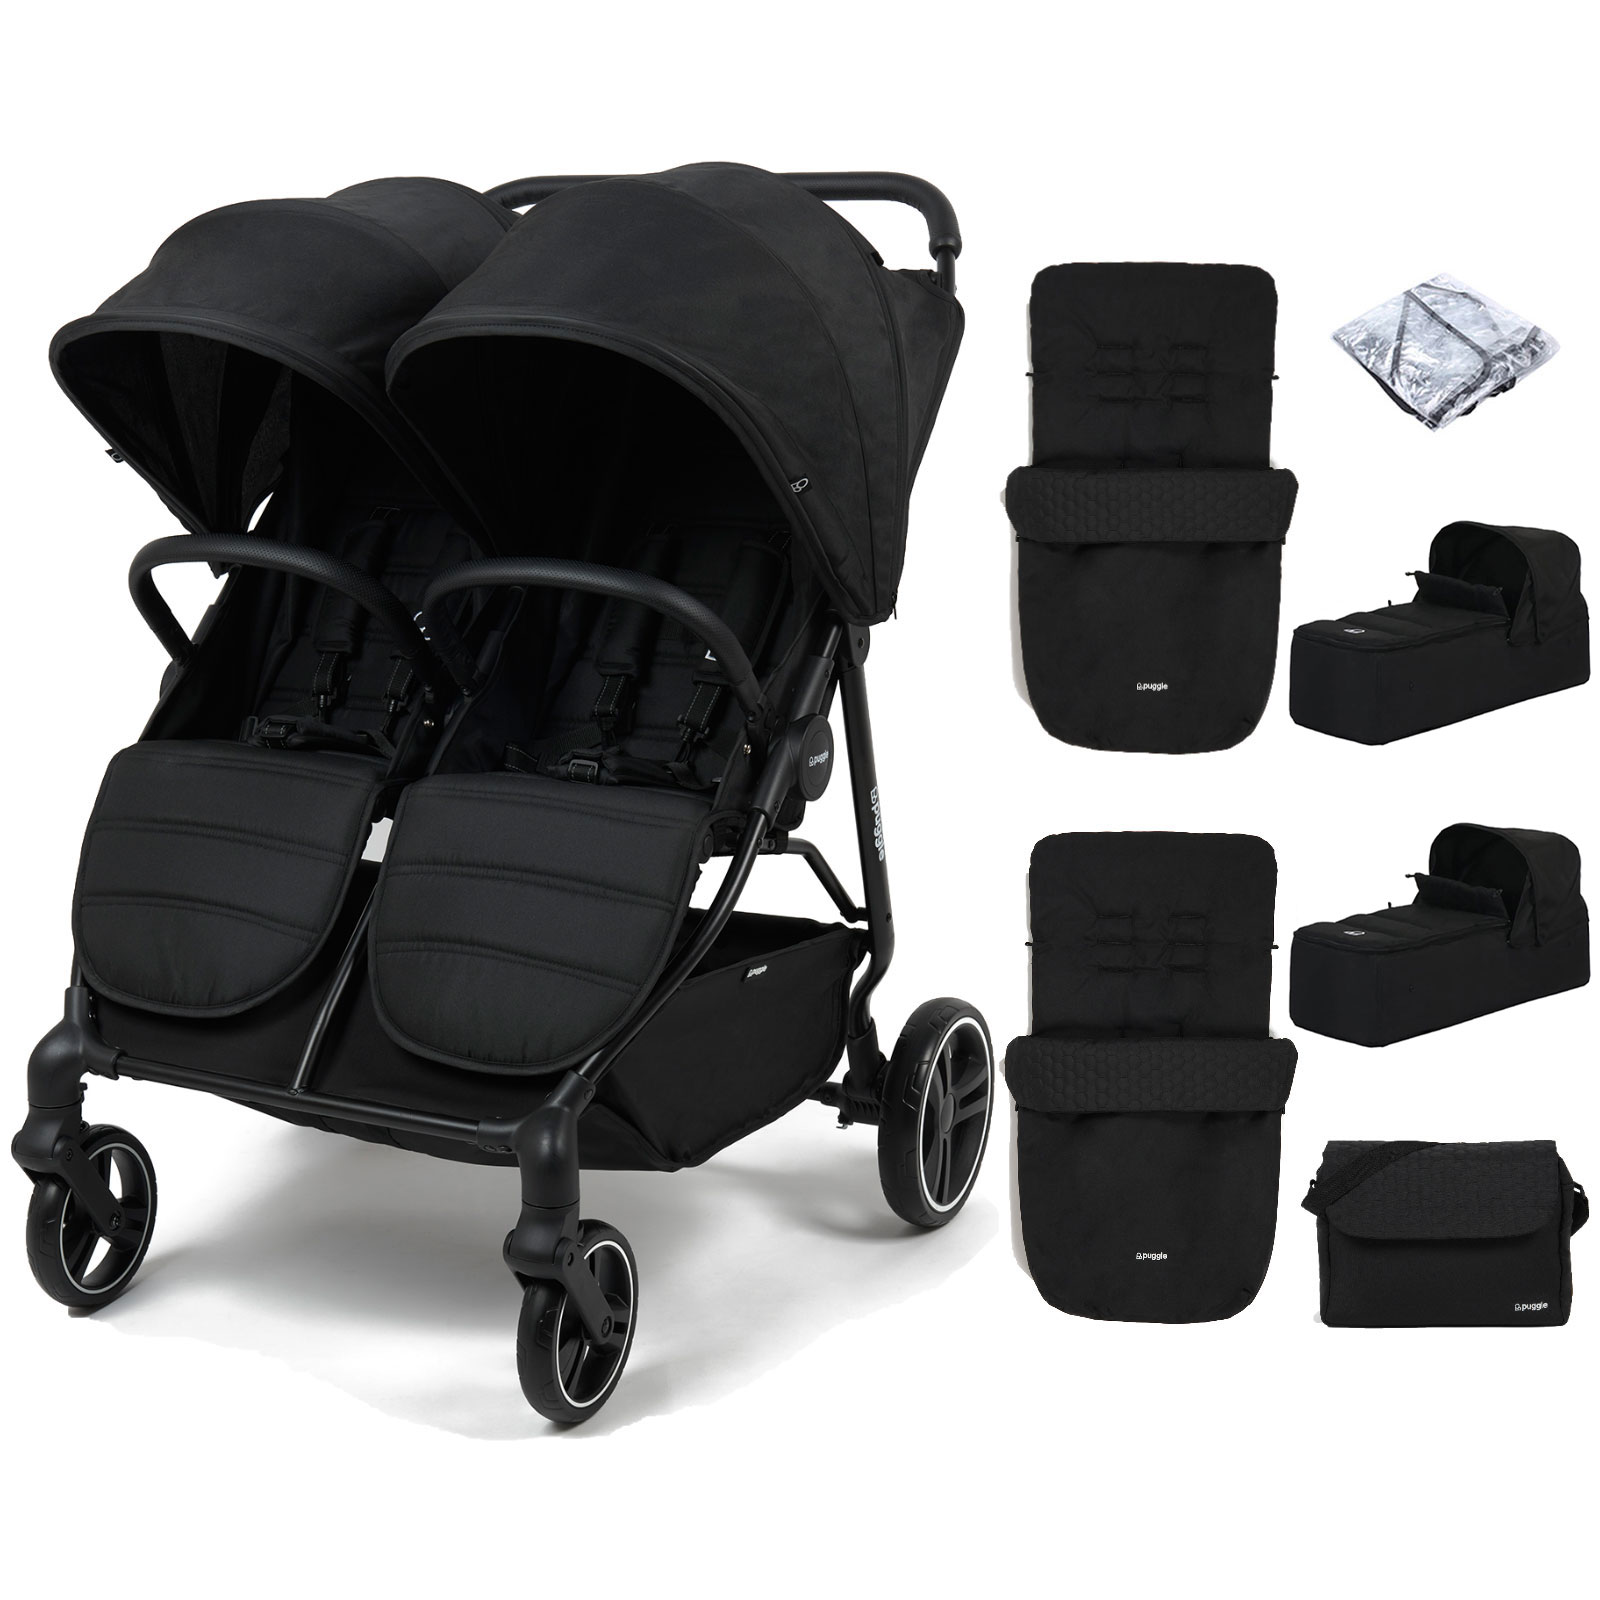 Puggle Urban City Easyfold Twin Pushchair with 2 Carrycots, 2 Footmuffs, & Changing Bag – Storm Black